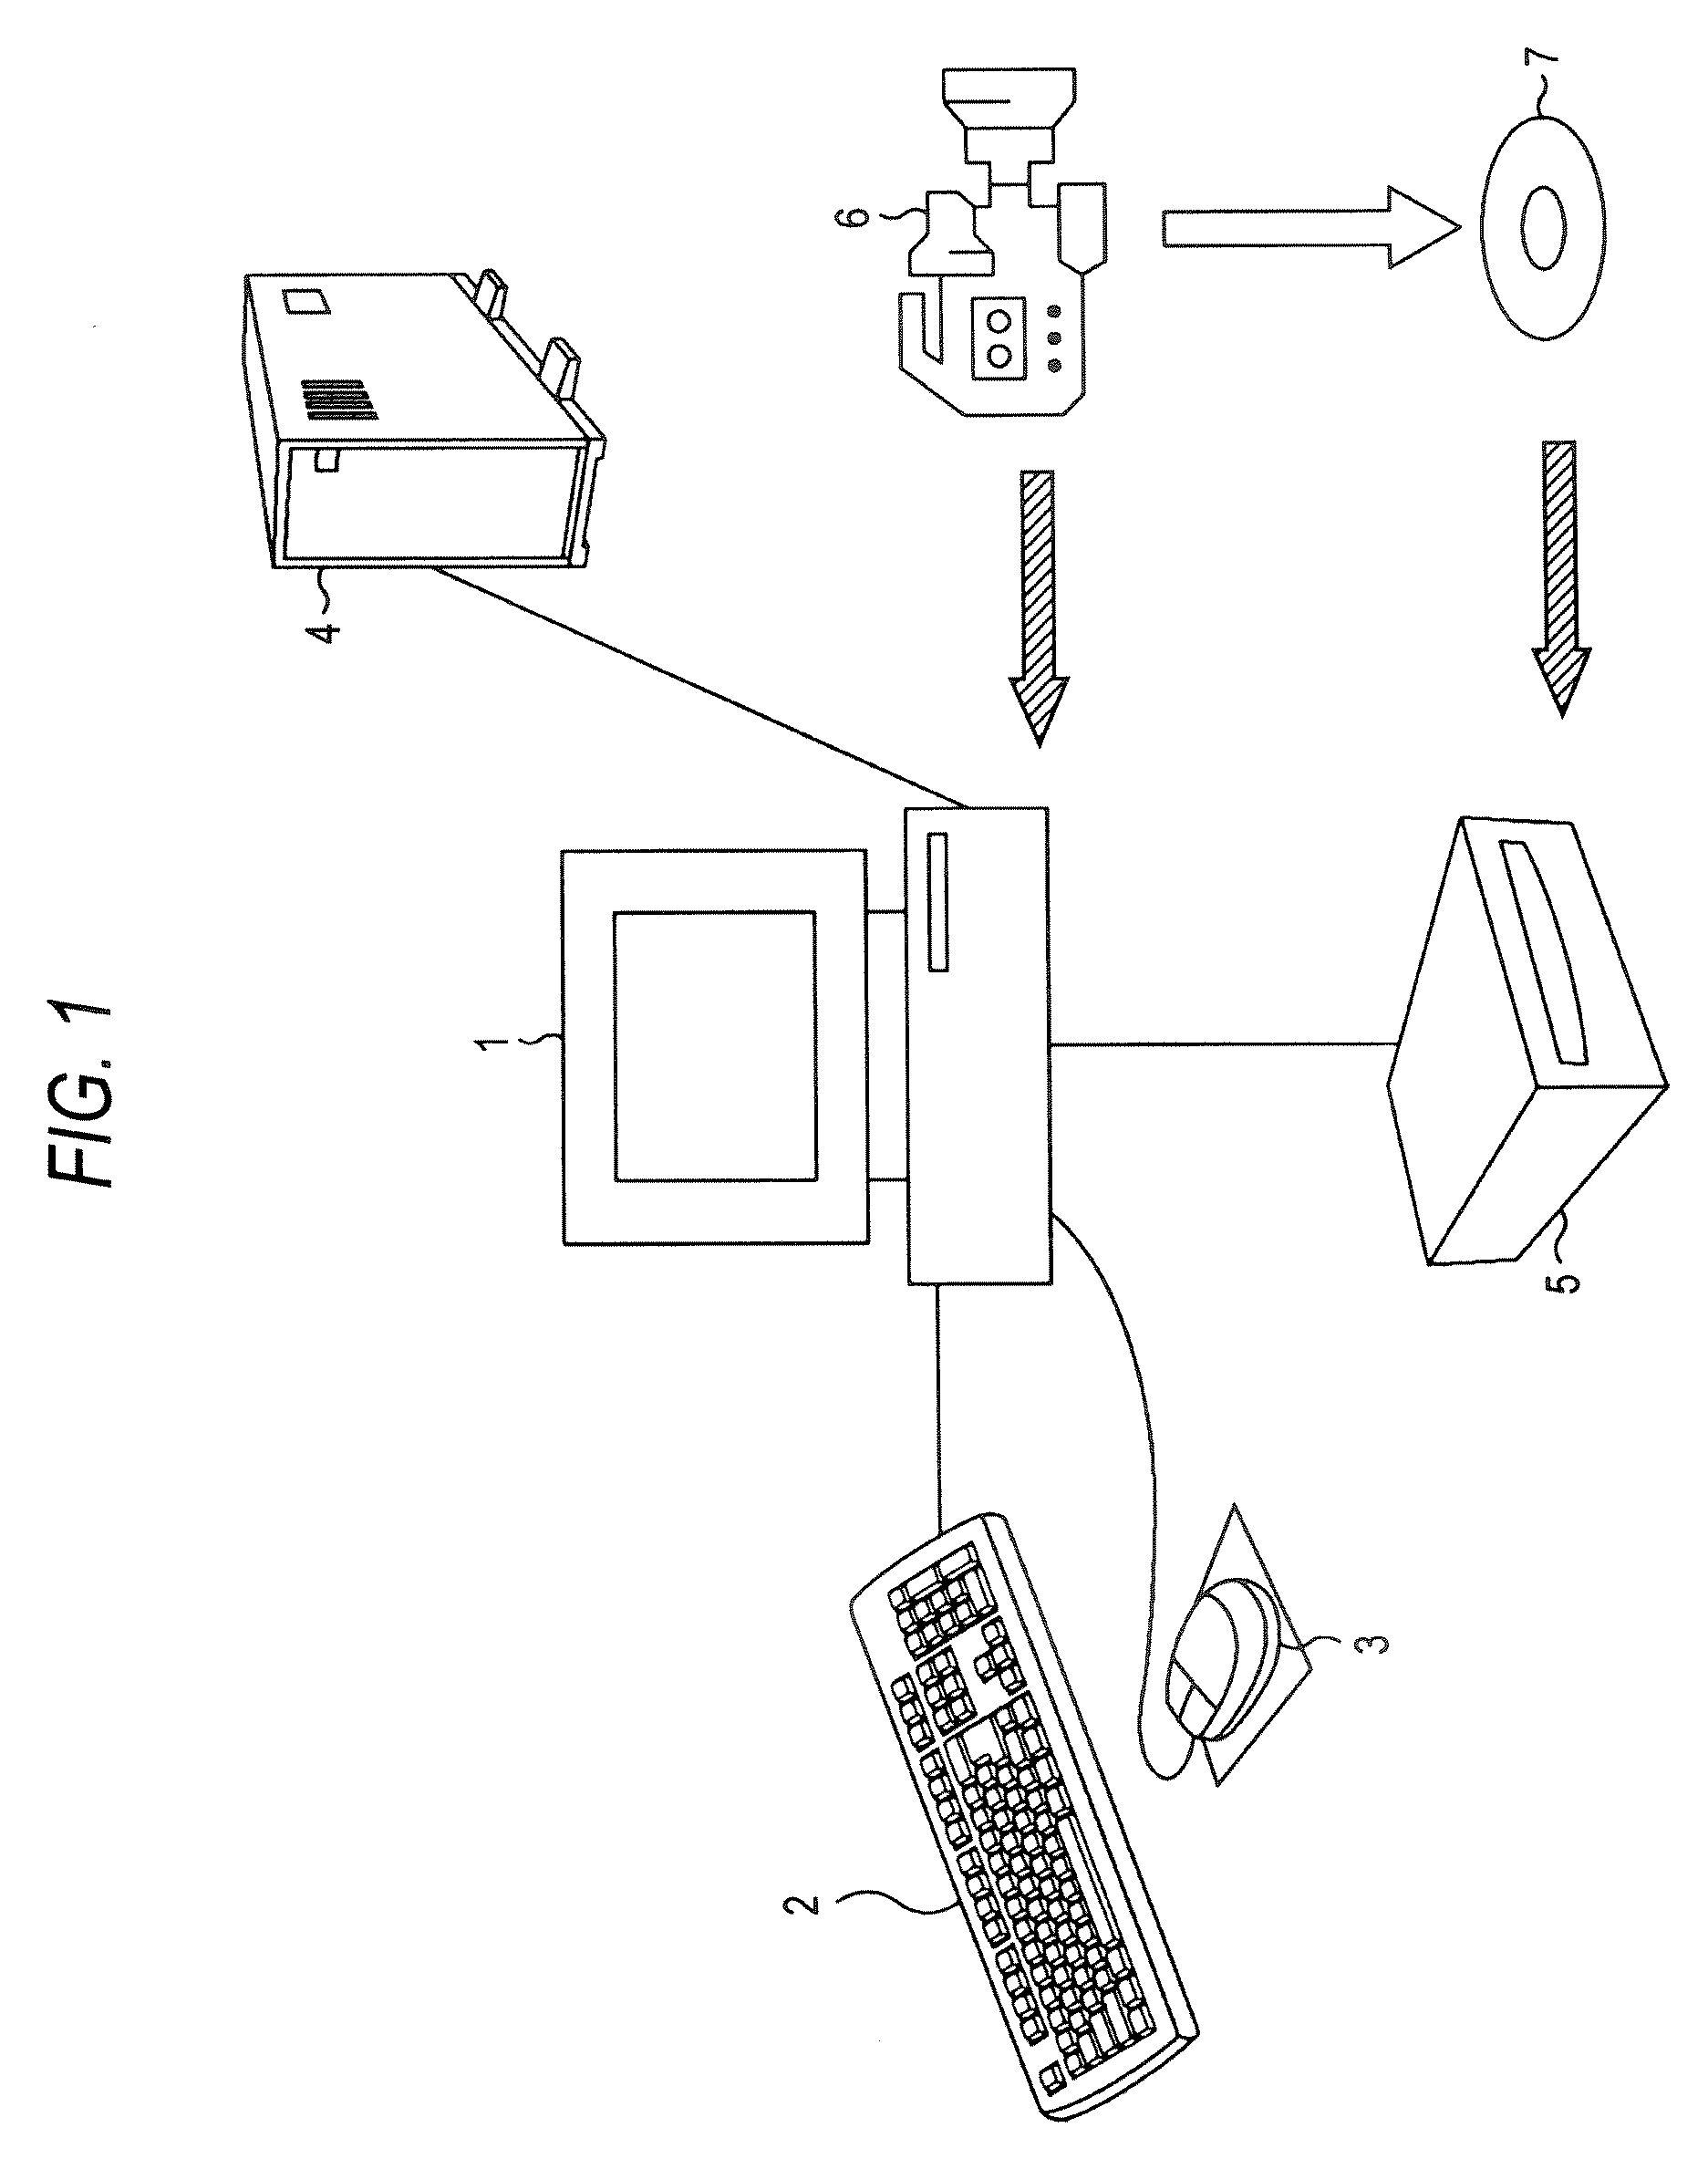 Data processing apparatus, data processing method, and program for processing image data of a moving image